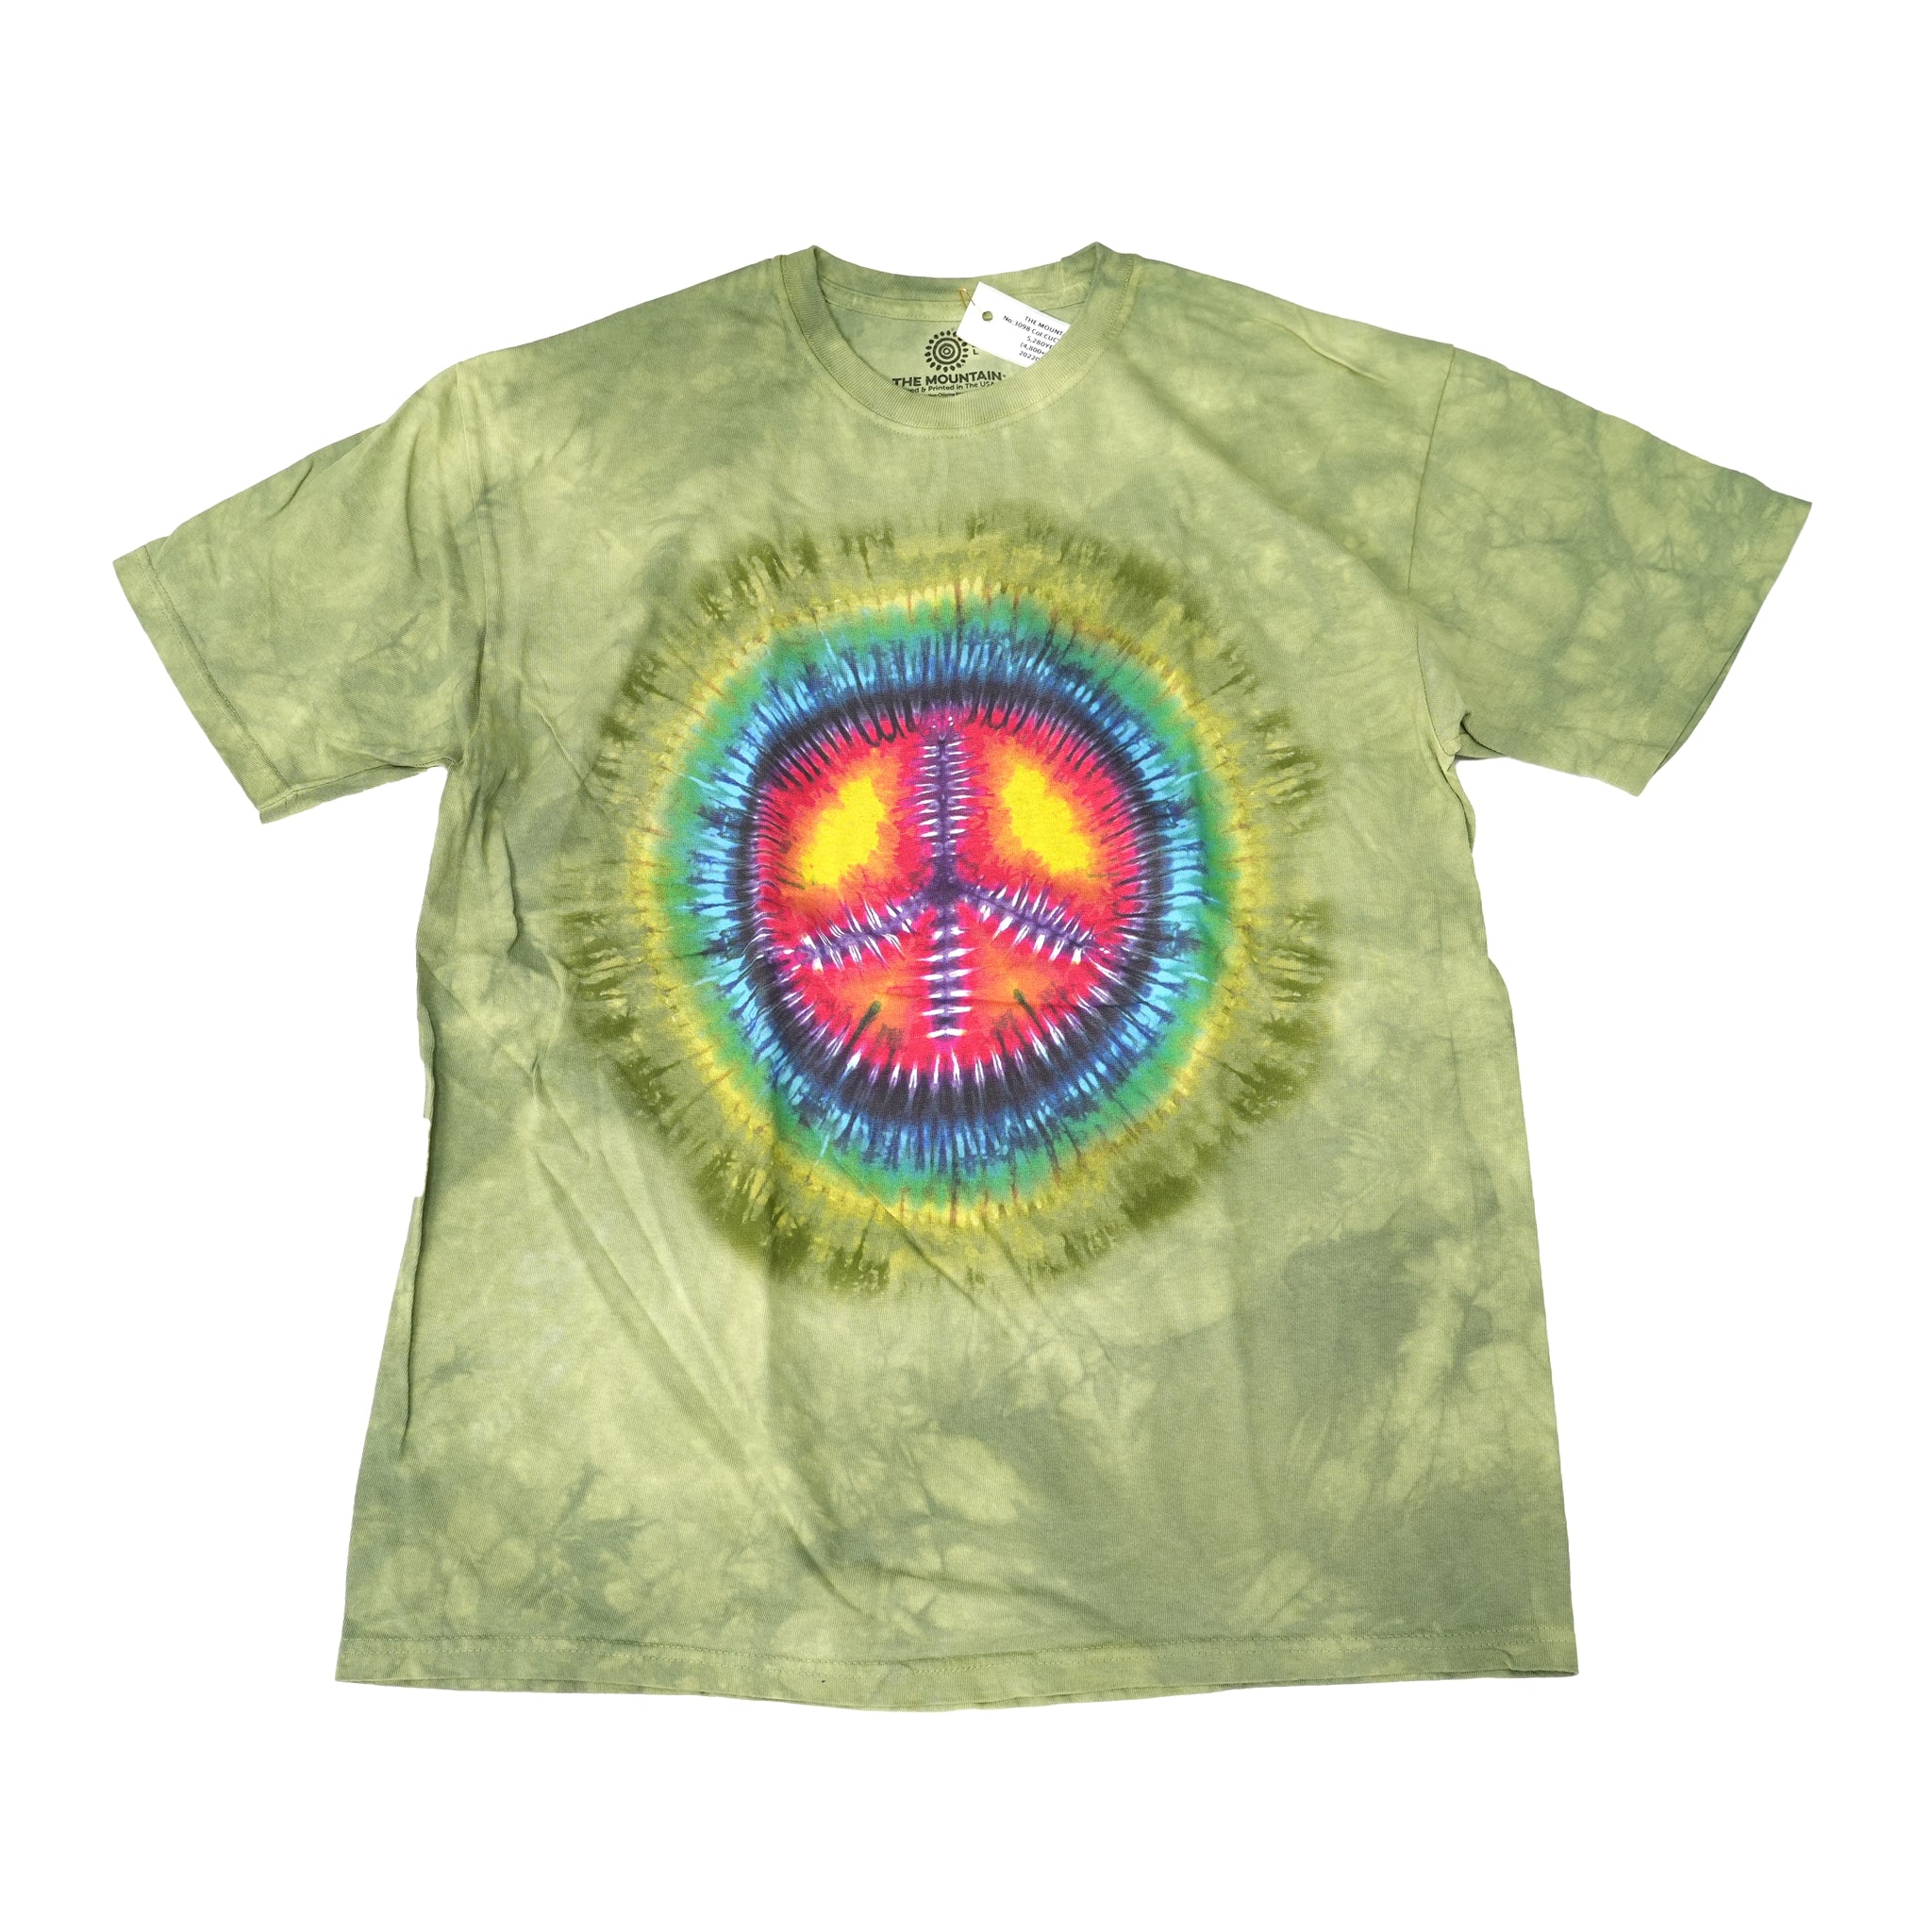 No:3090 | Name:Hand-Dyed Tee | Color:Peace【THE MOUNTAIN】【ネコポス選択可能】